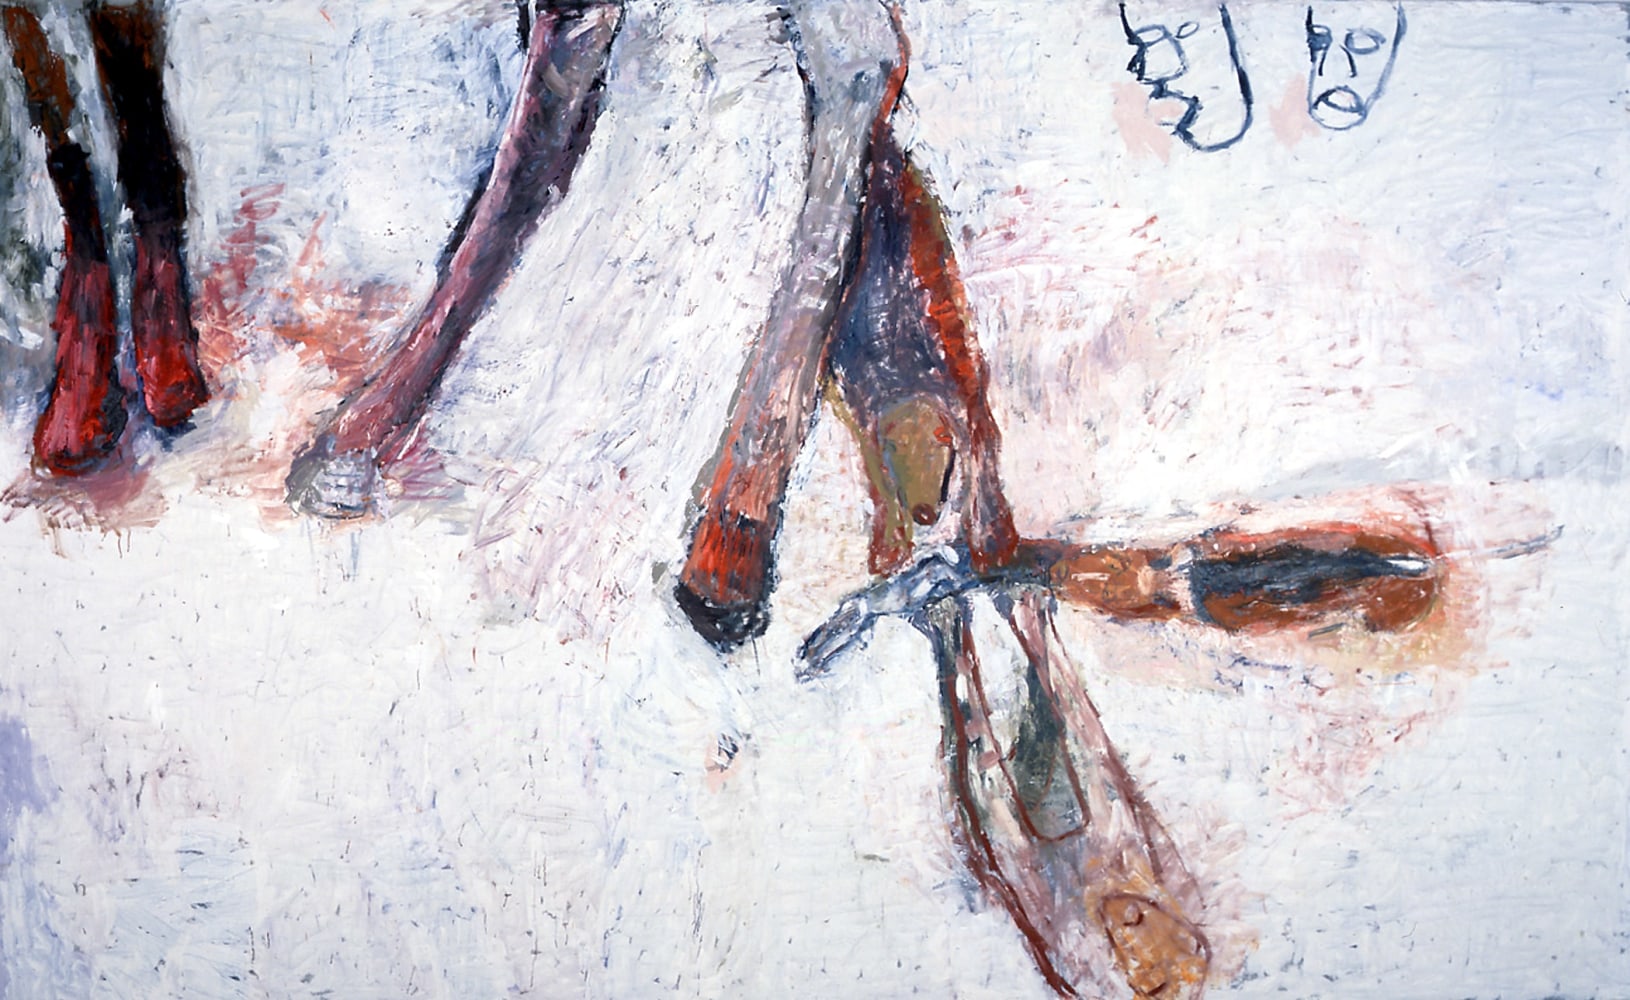 Susan Rothenberg
Dogs Killing Rabbit, 1991-92
oil on canvas
87 x 141 inches (221 x 358,1 cm)
SW 92290
Collection of The Museum of Modern Art, New York